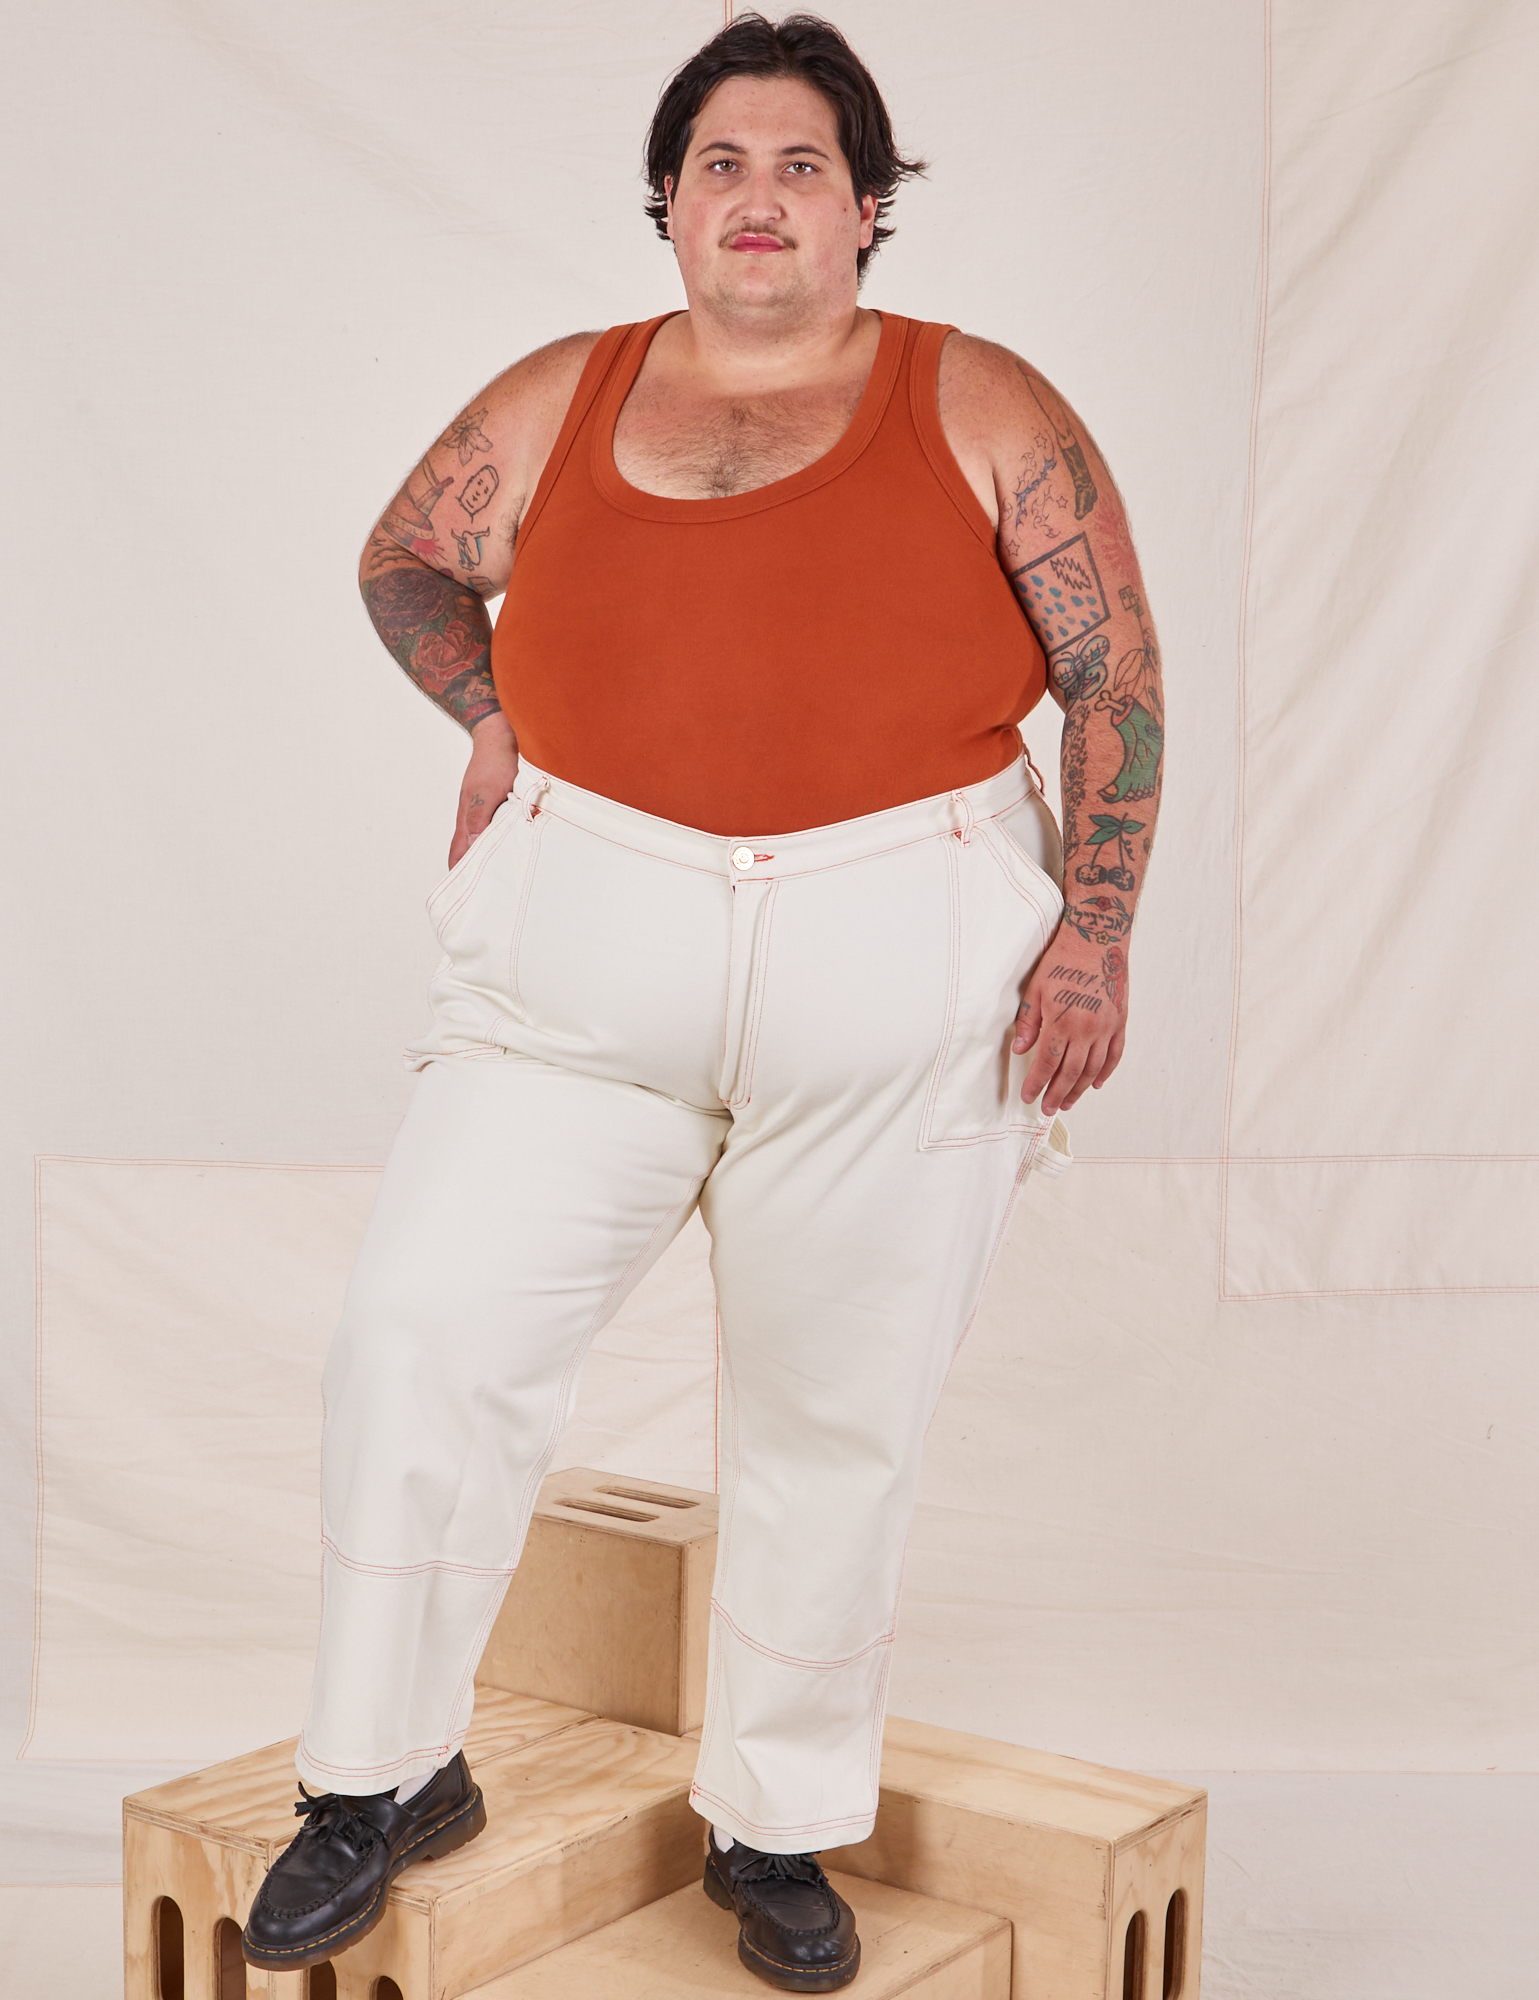 Sam is 5&#39;10&quot; and wearing 3XL Carpenter Jeans in Vintage Tee Off-White paired with burnt terracotta Cropped Tank Top